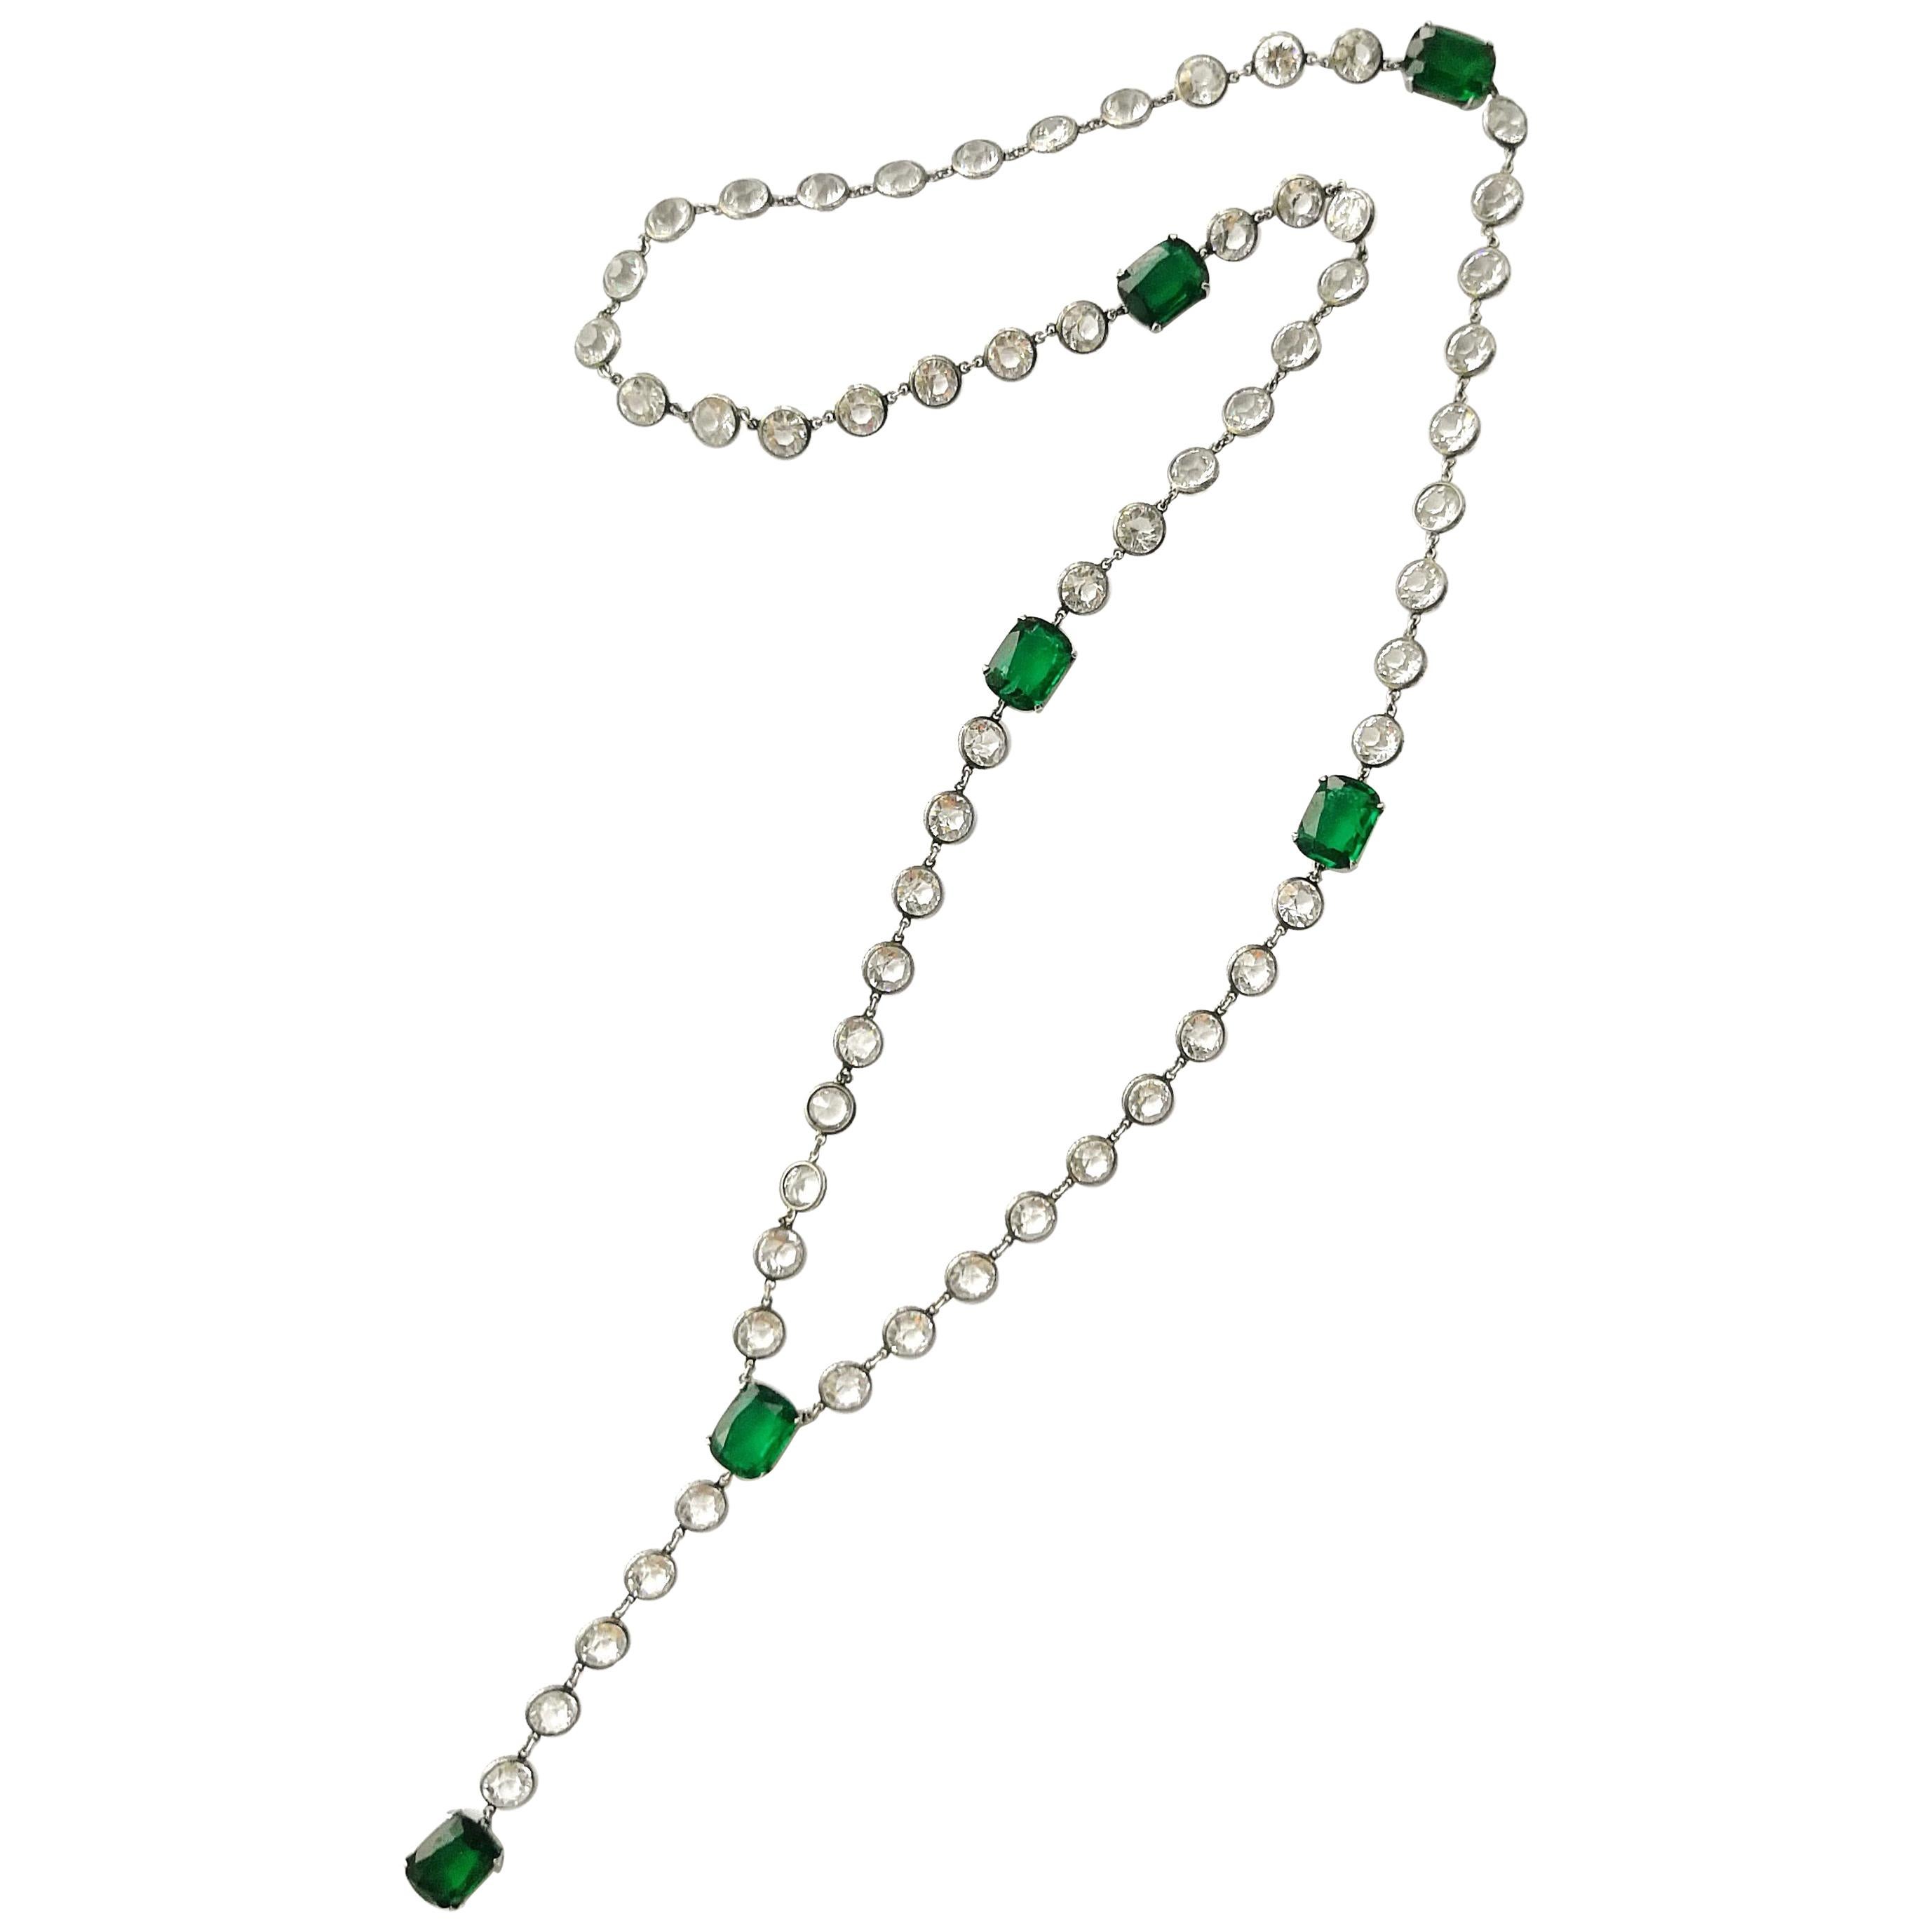 Silver/ emerald glass and clear crystal sautoir necklace, France, 1920s